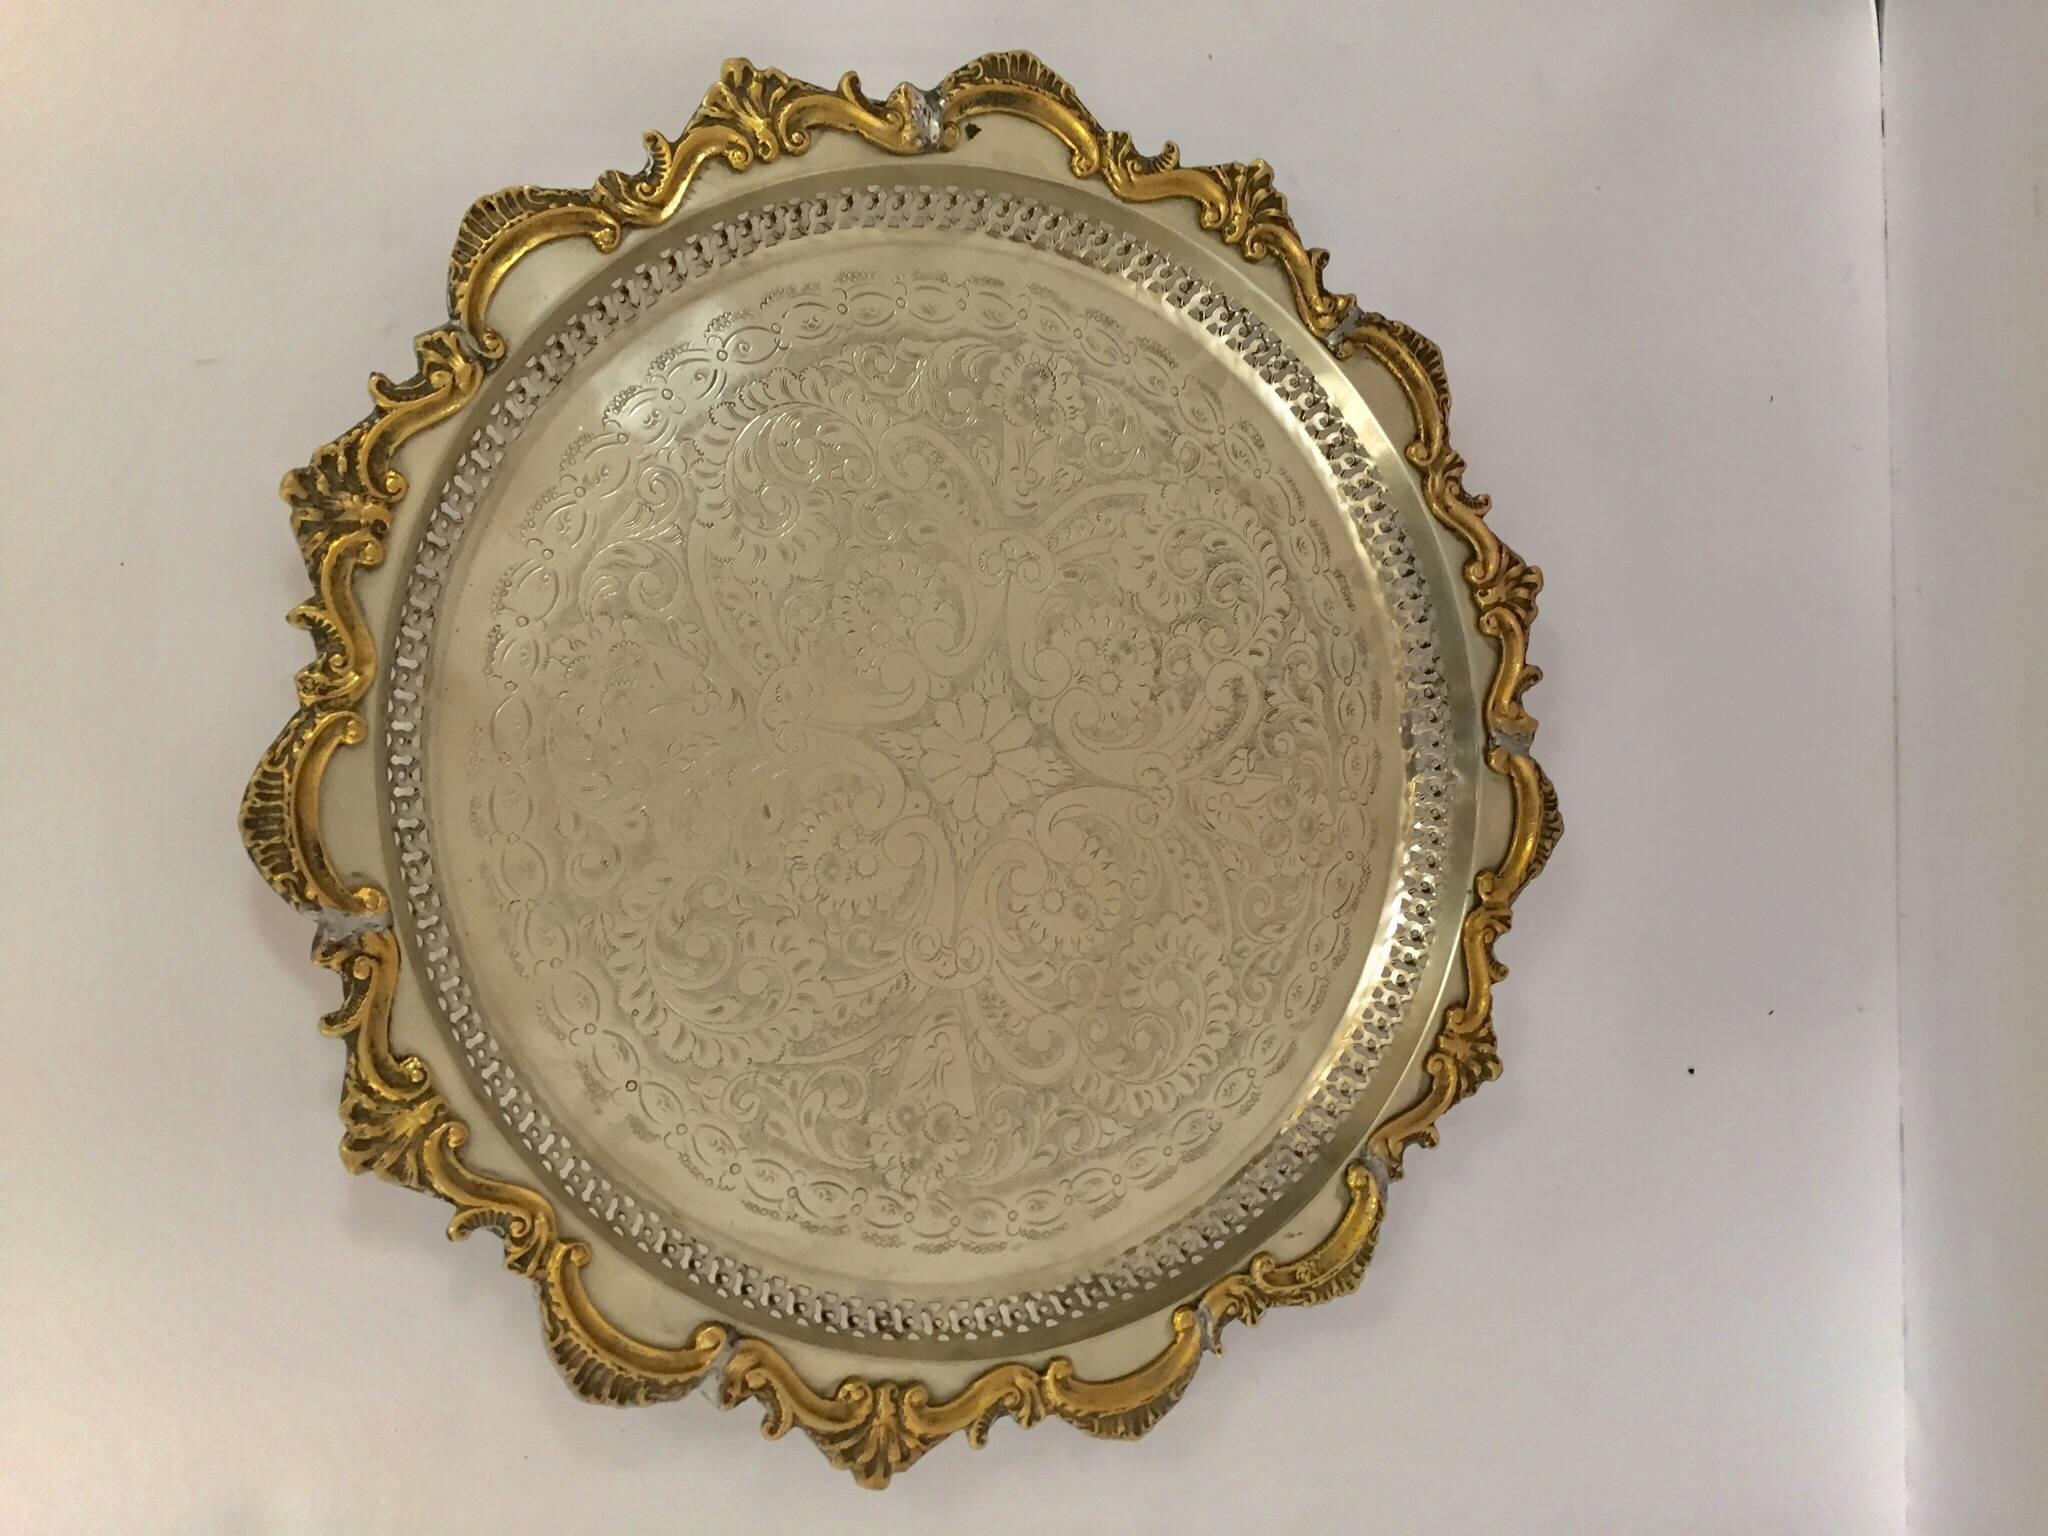 Gorgeous hand chased silver plated large Moroccan round serving tray.
Hand-carved amazing Moorish etching motif and silver finish with brass floral design on the trim.
George V style. Signed and numbered, handcrafted by Master Artisan Benani in